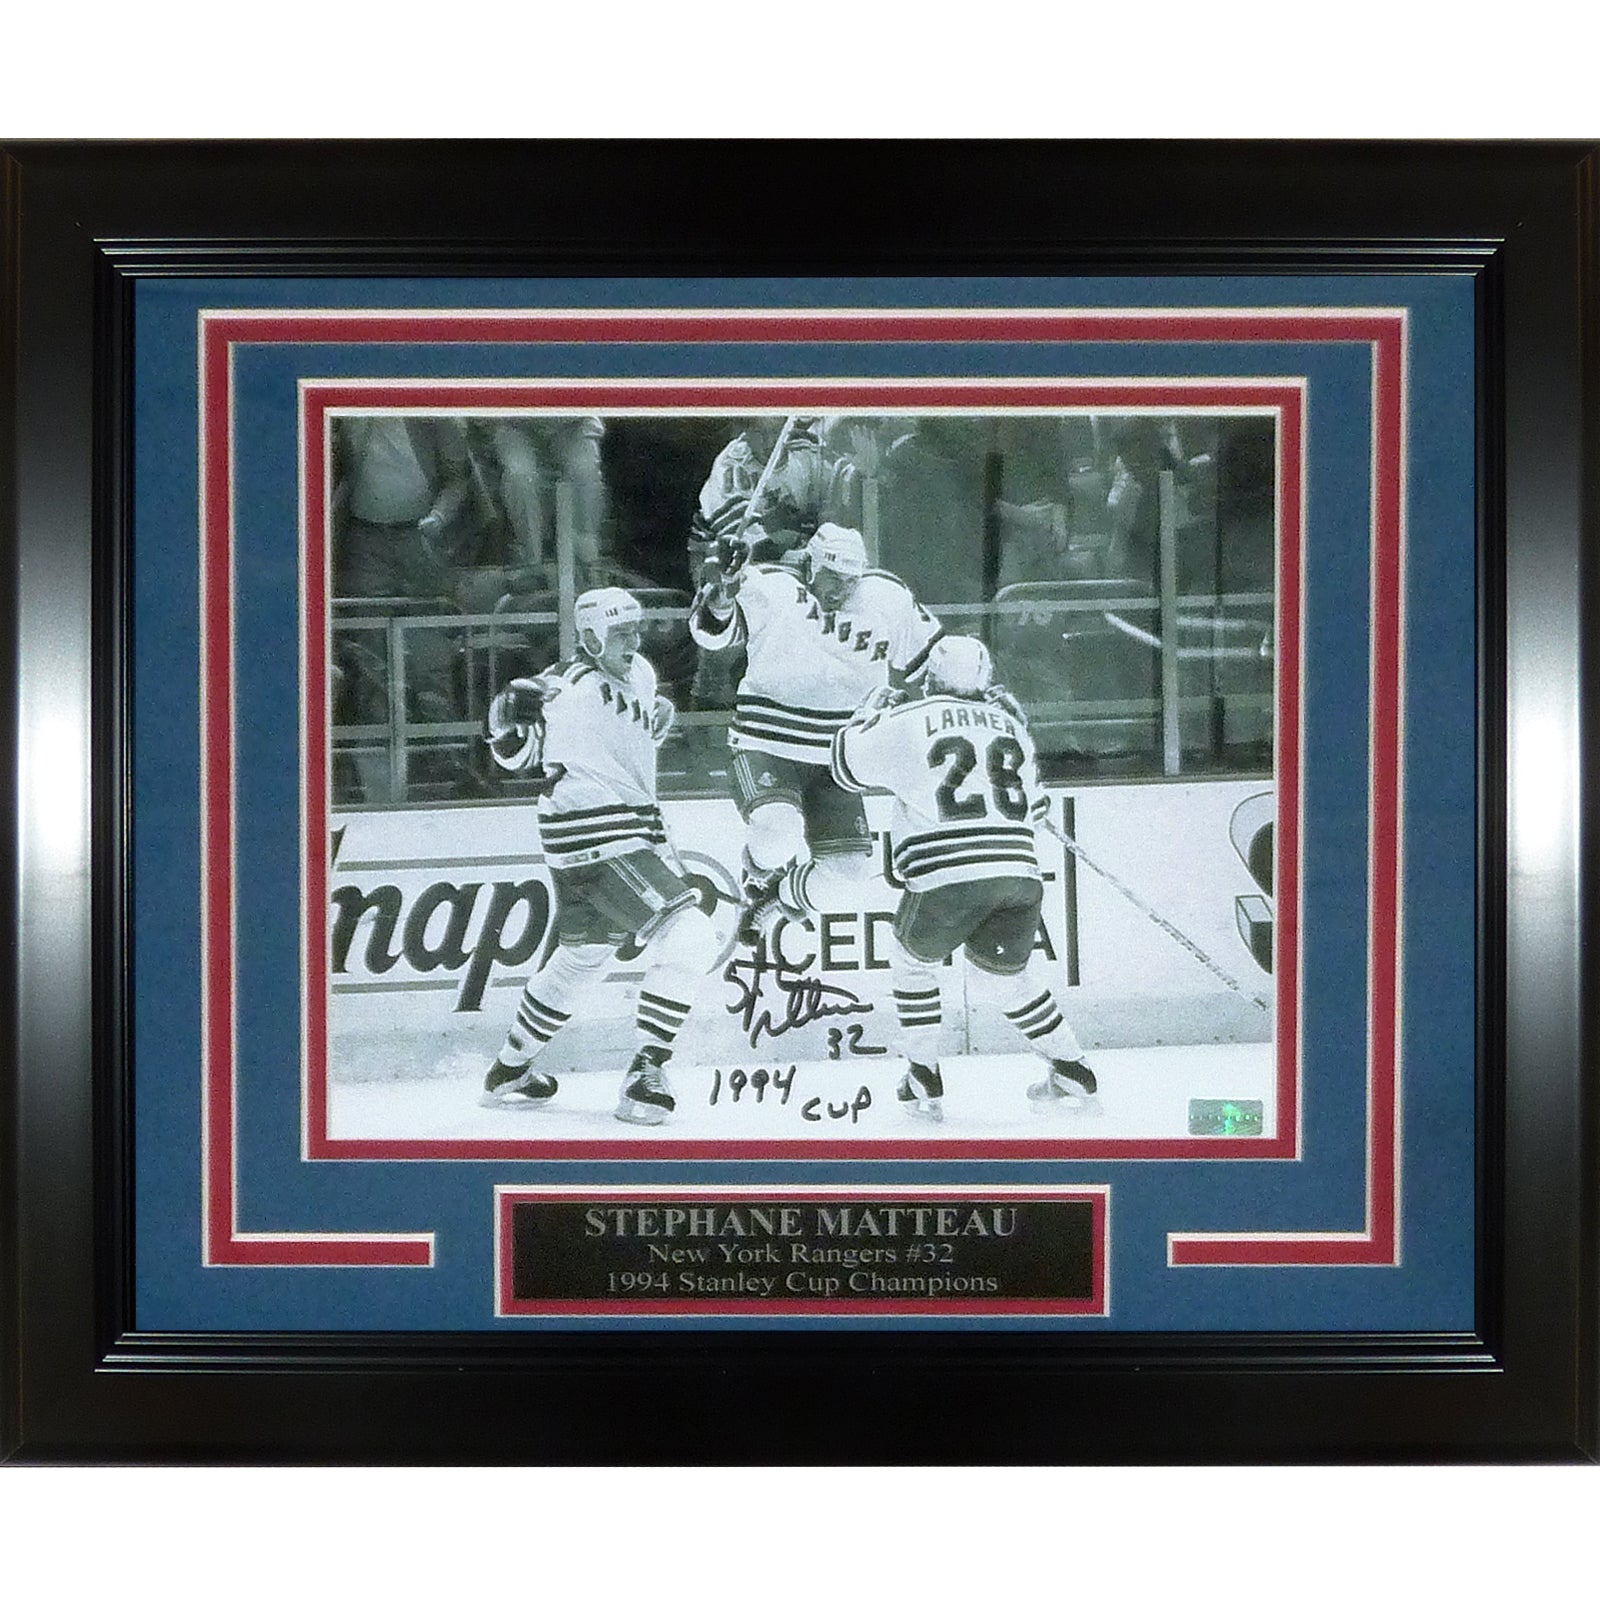 Stephane Matteau Autographed New York Rangers (Stanley Cup Celebration) Deluxe Framed 8x10 Photo